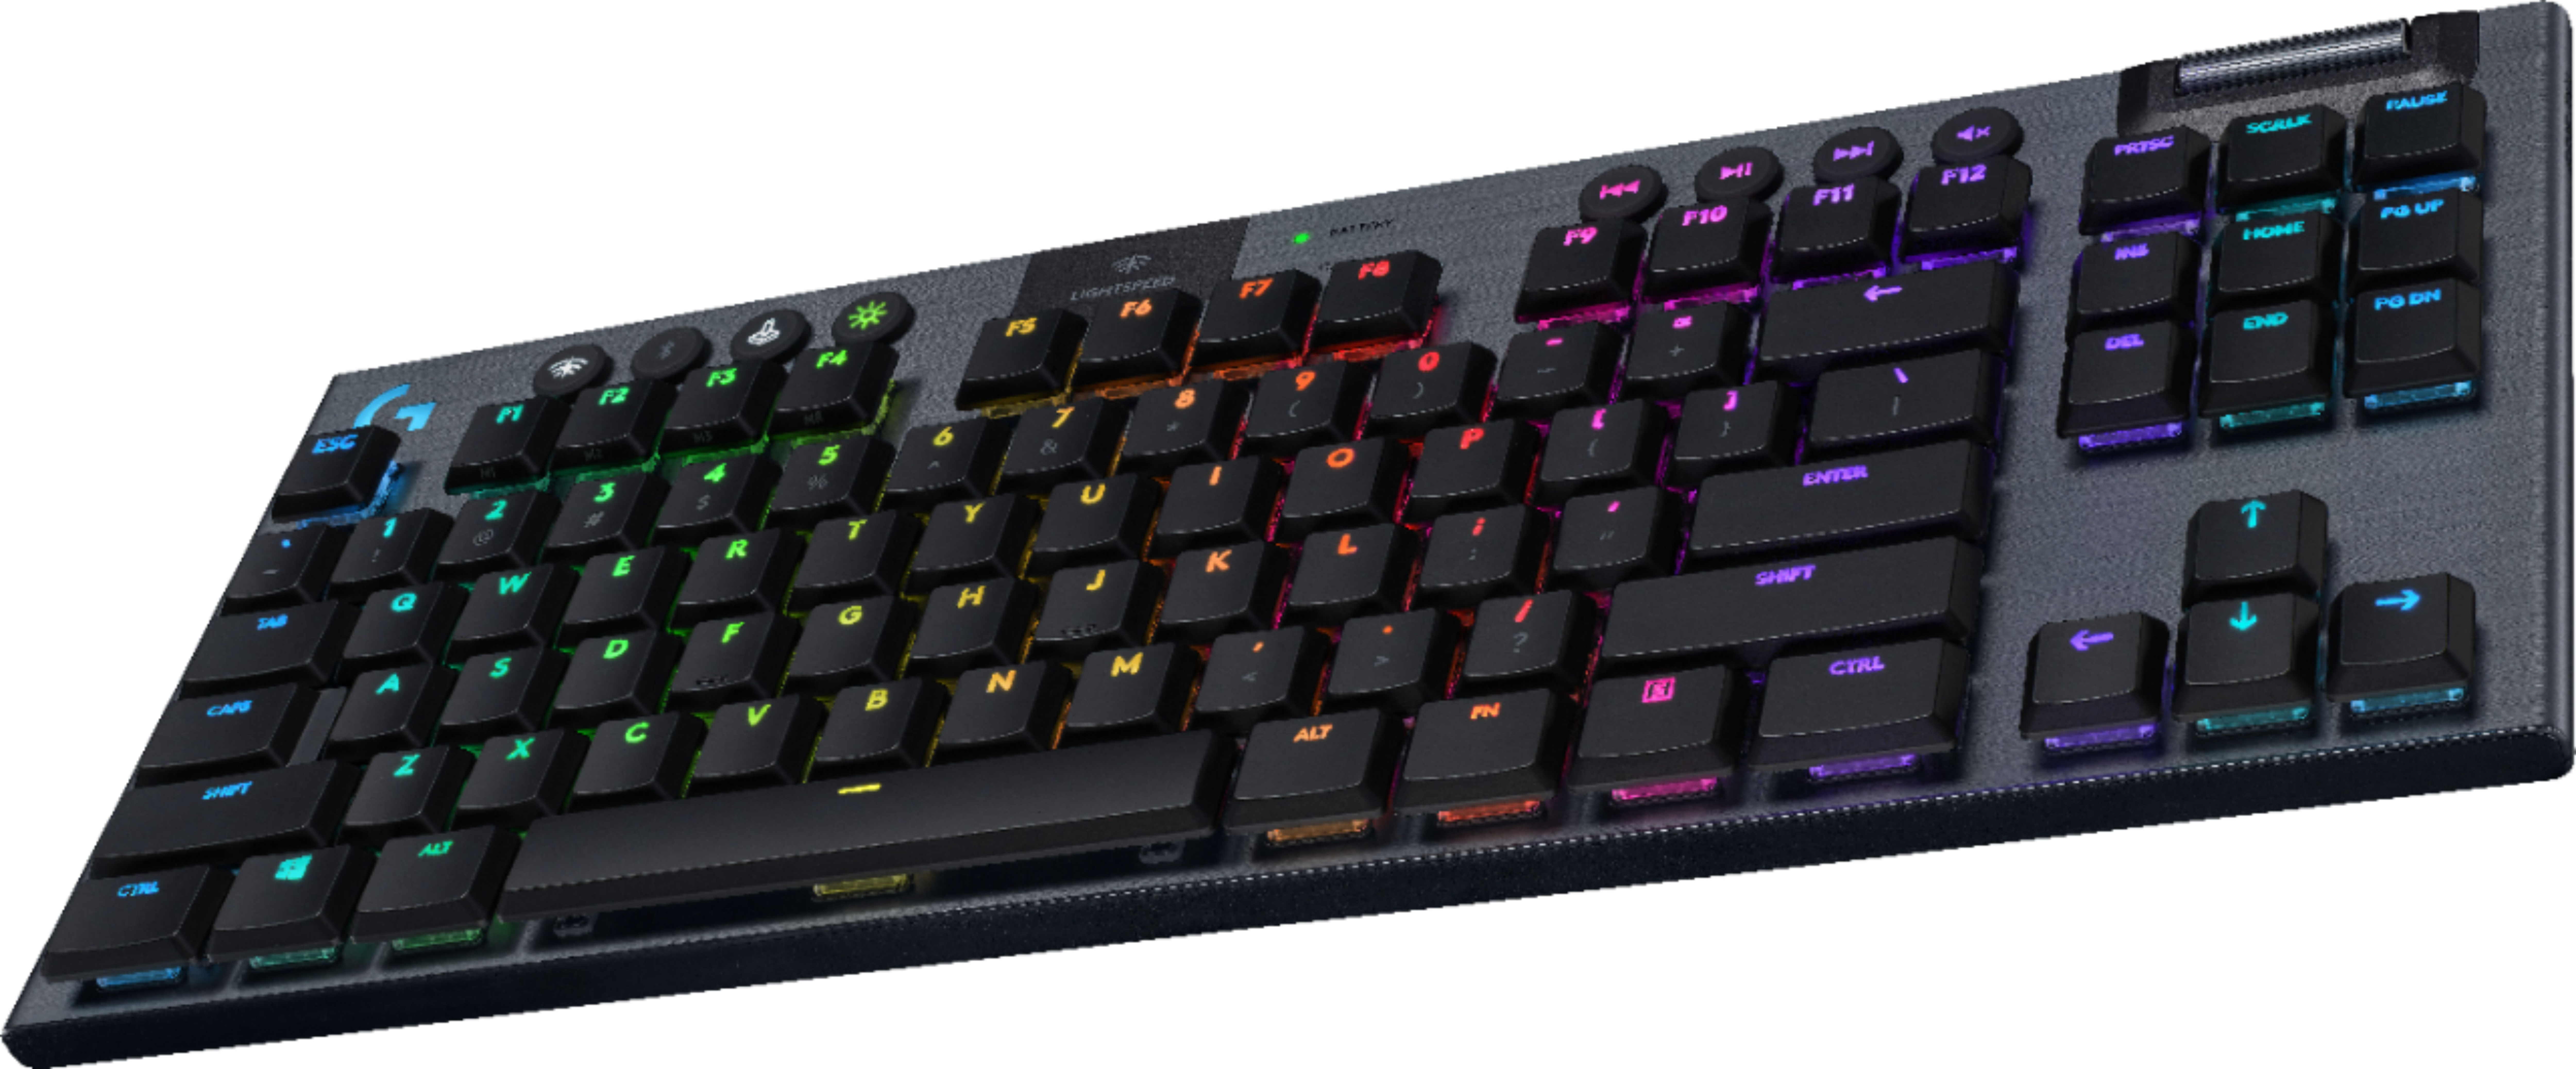 Left View: Logitech - G815 LIGHTSYNC Full-size Wired Mechanical GL Tactile Switch Gaming Keyboard with RGB Backlighting - Carbon